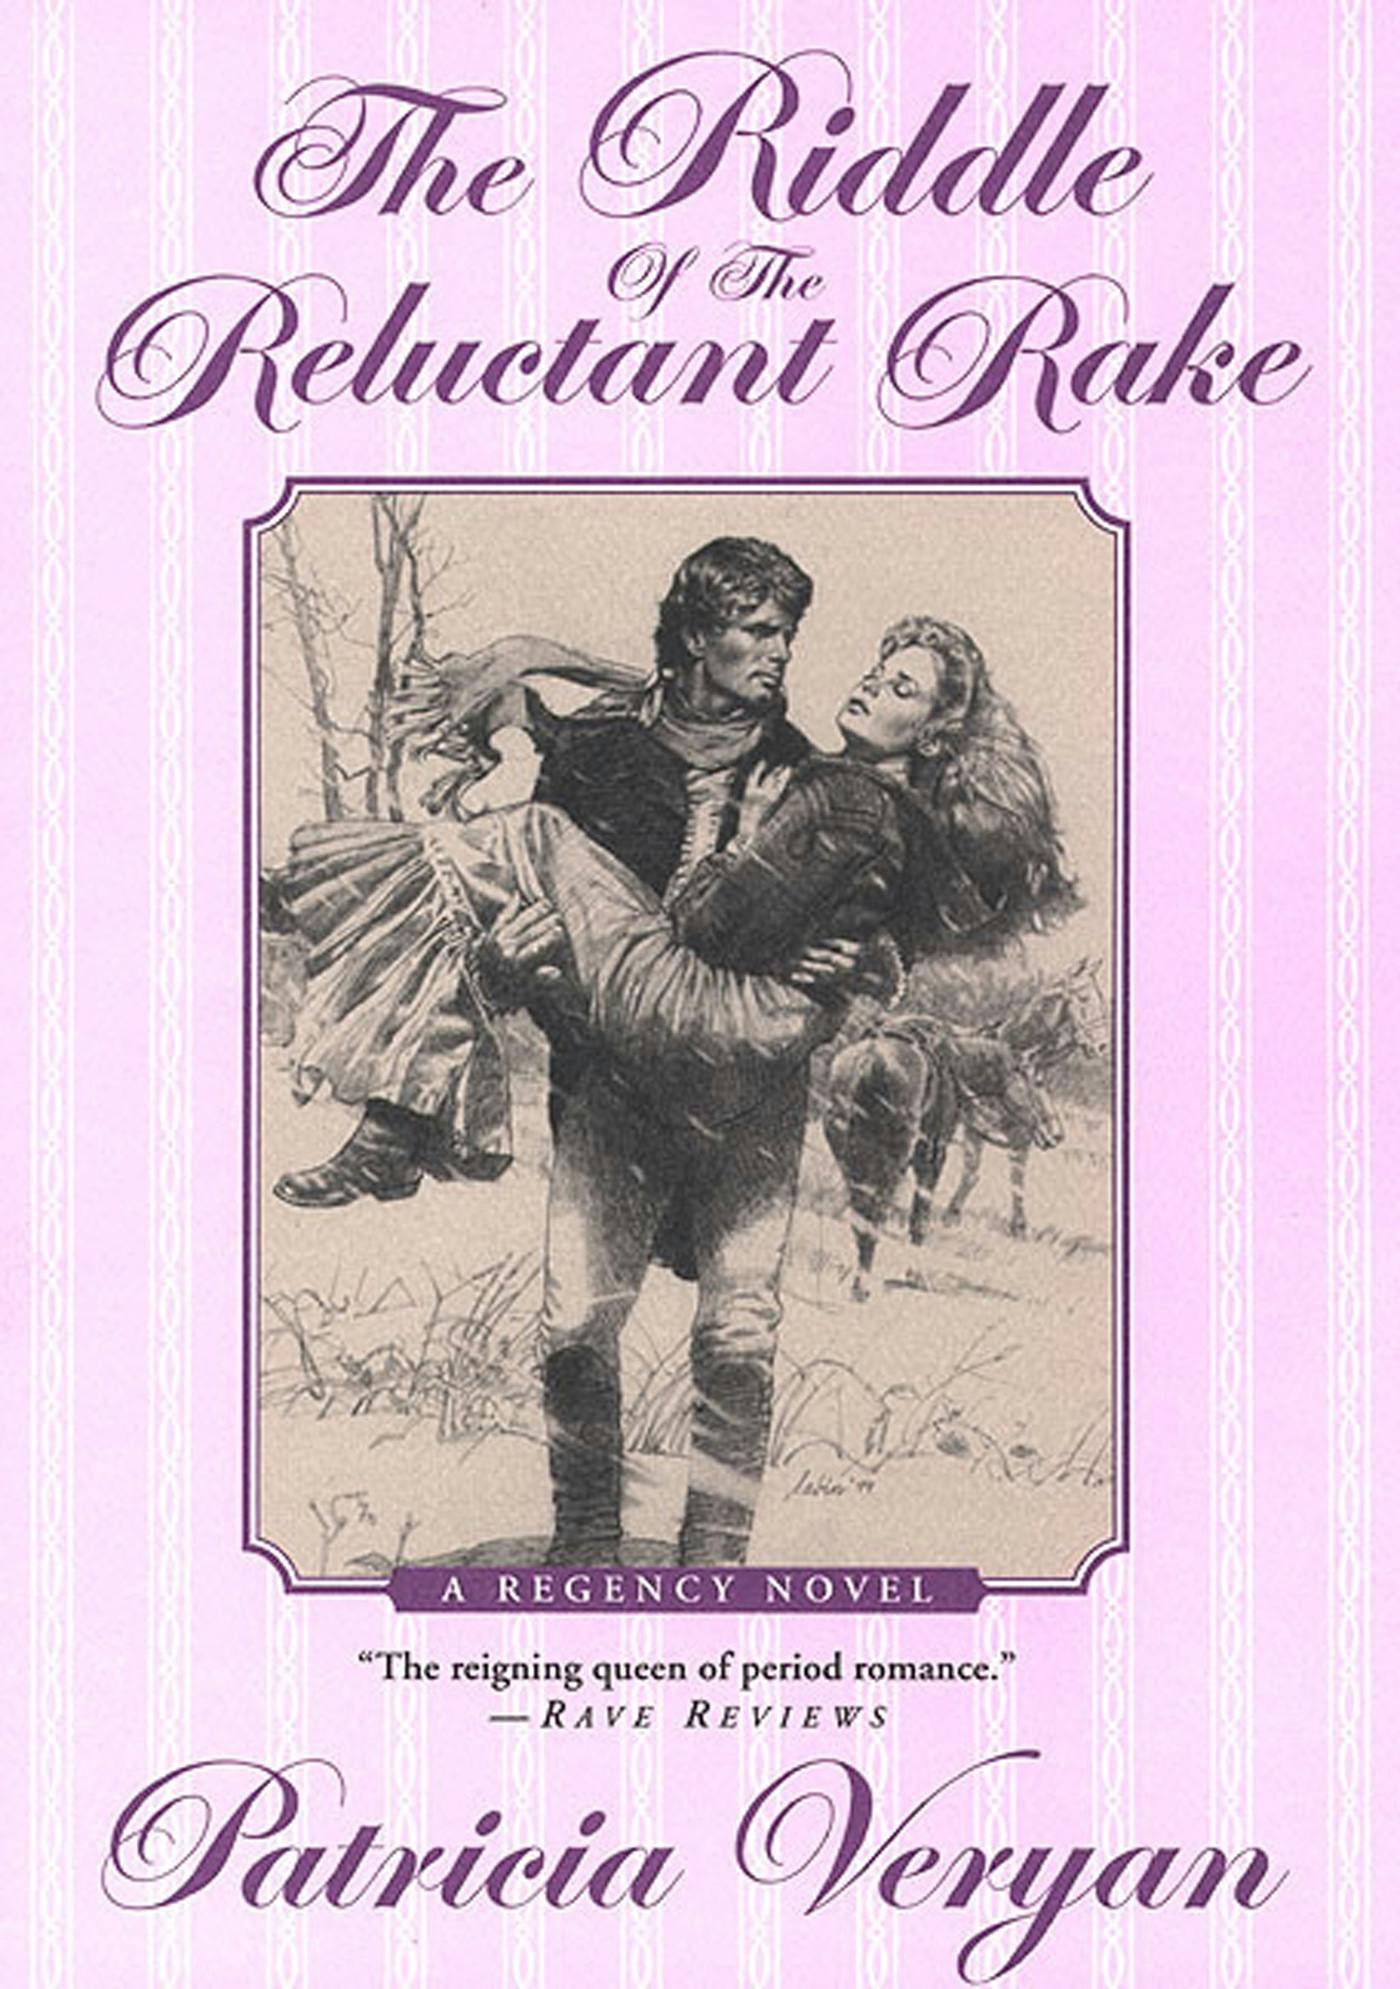 Image of The Riddle of the Reluctant Rake